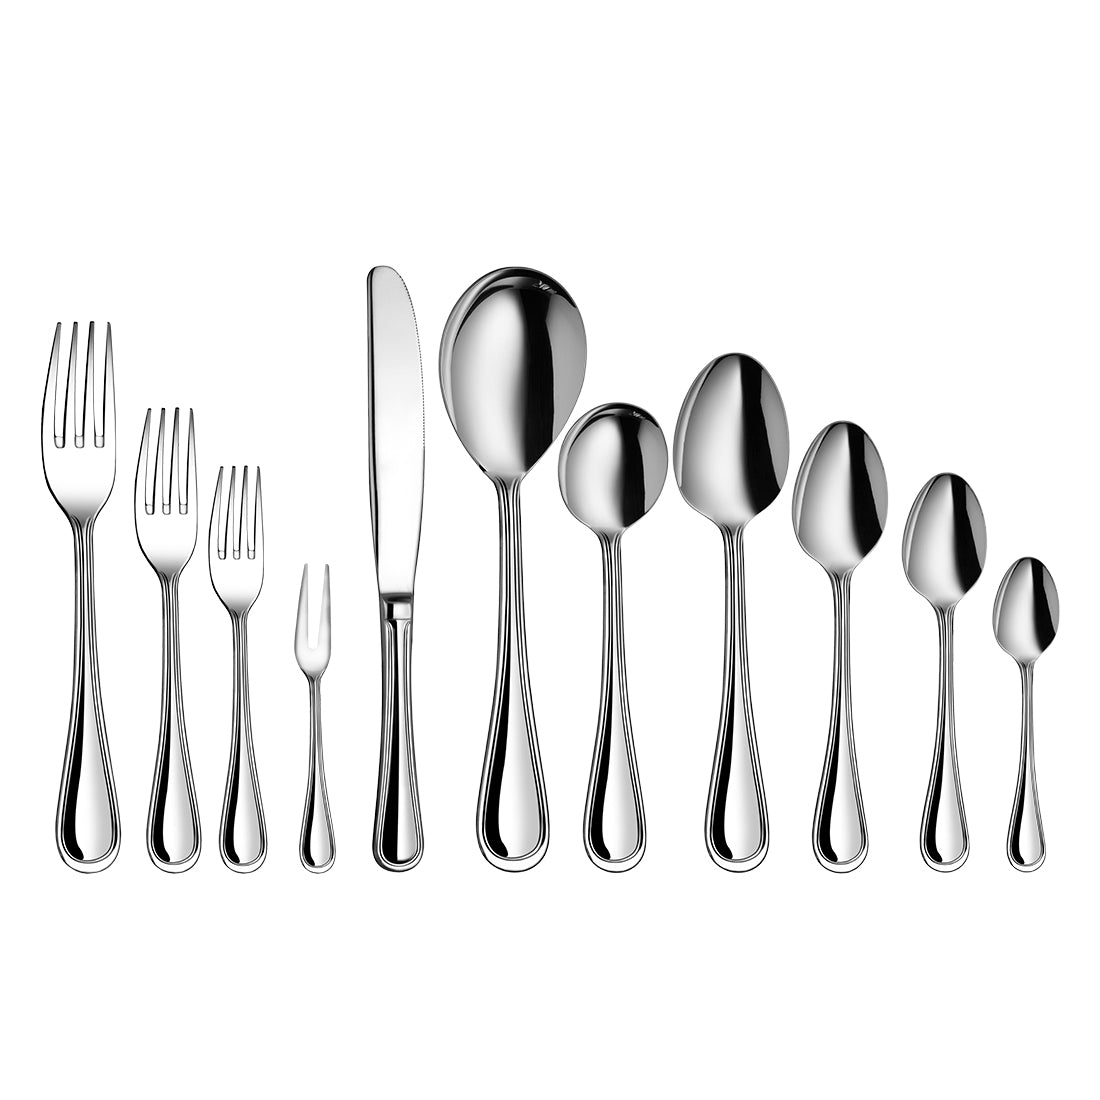 Why is Stainless Steel Cutlery best for regular use?